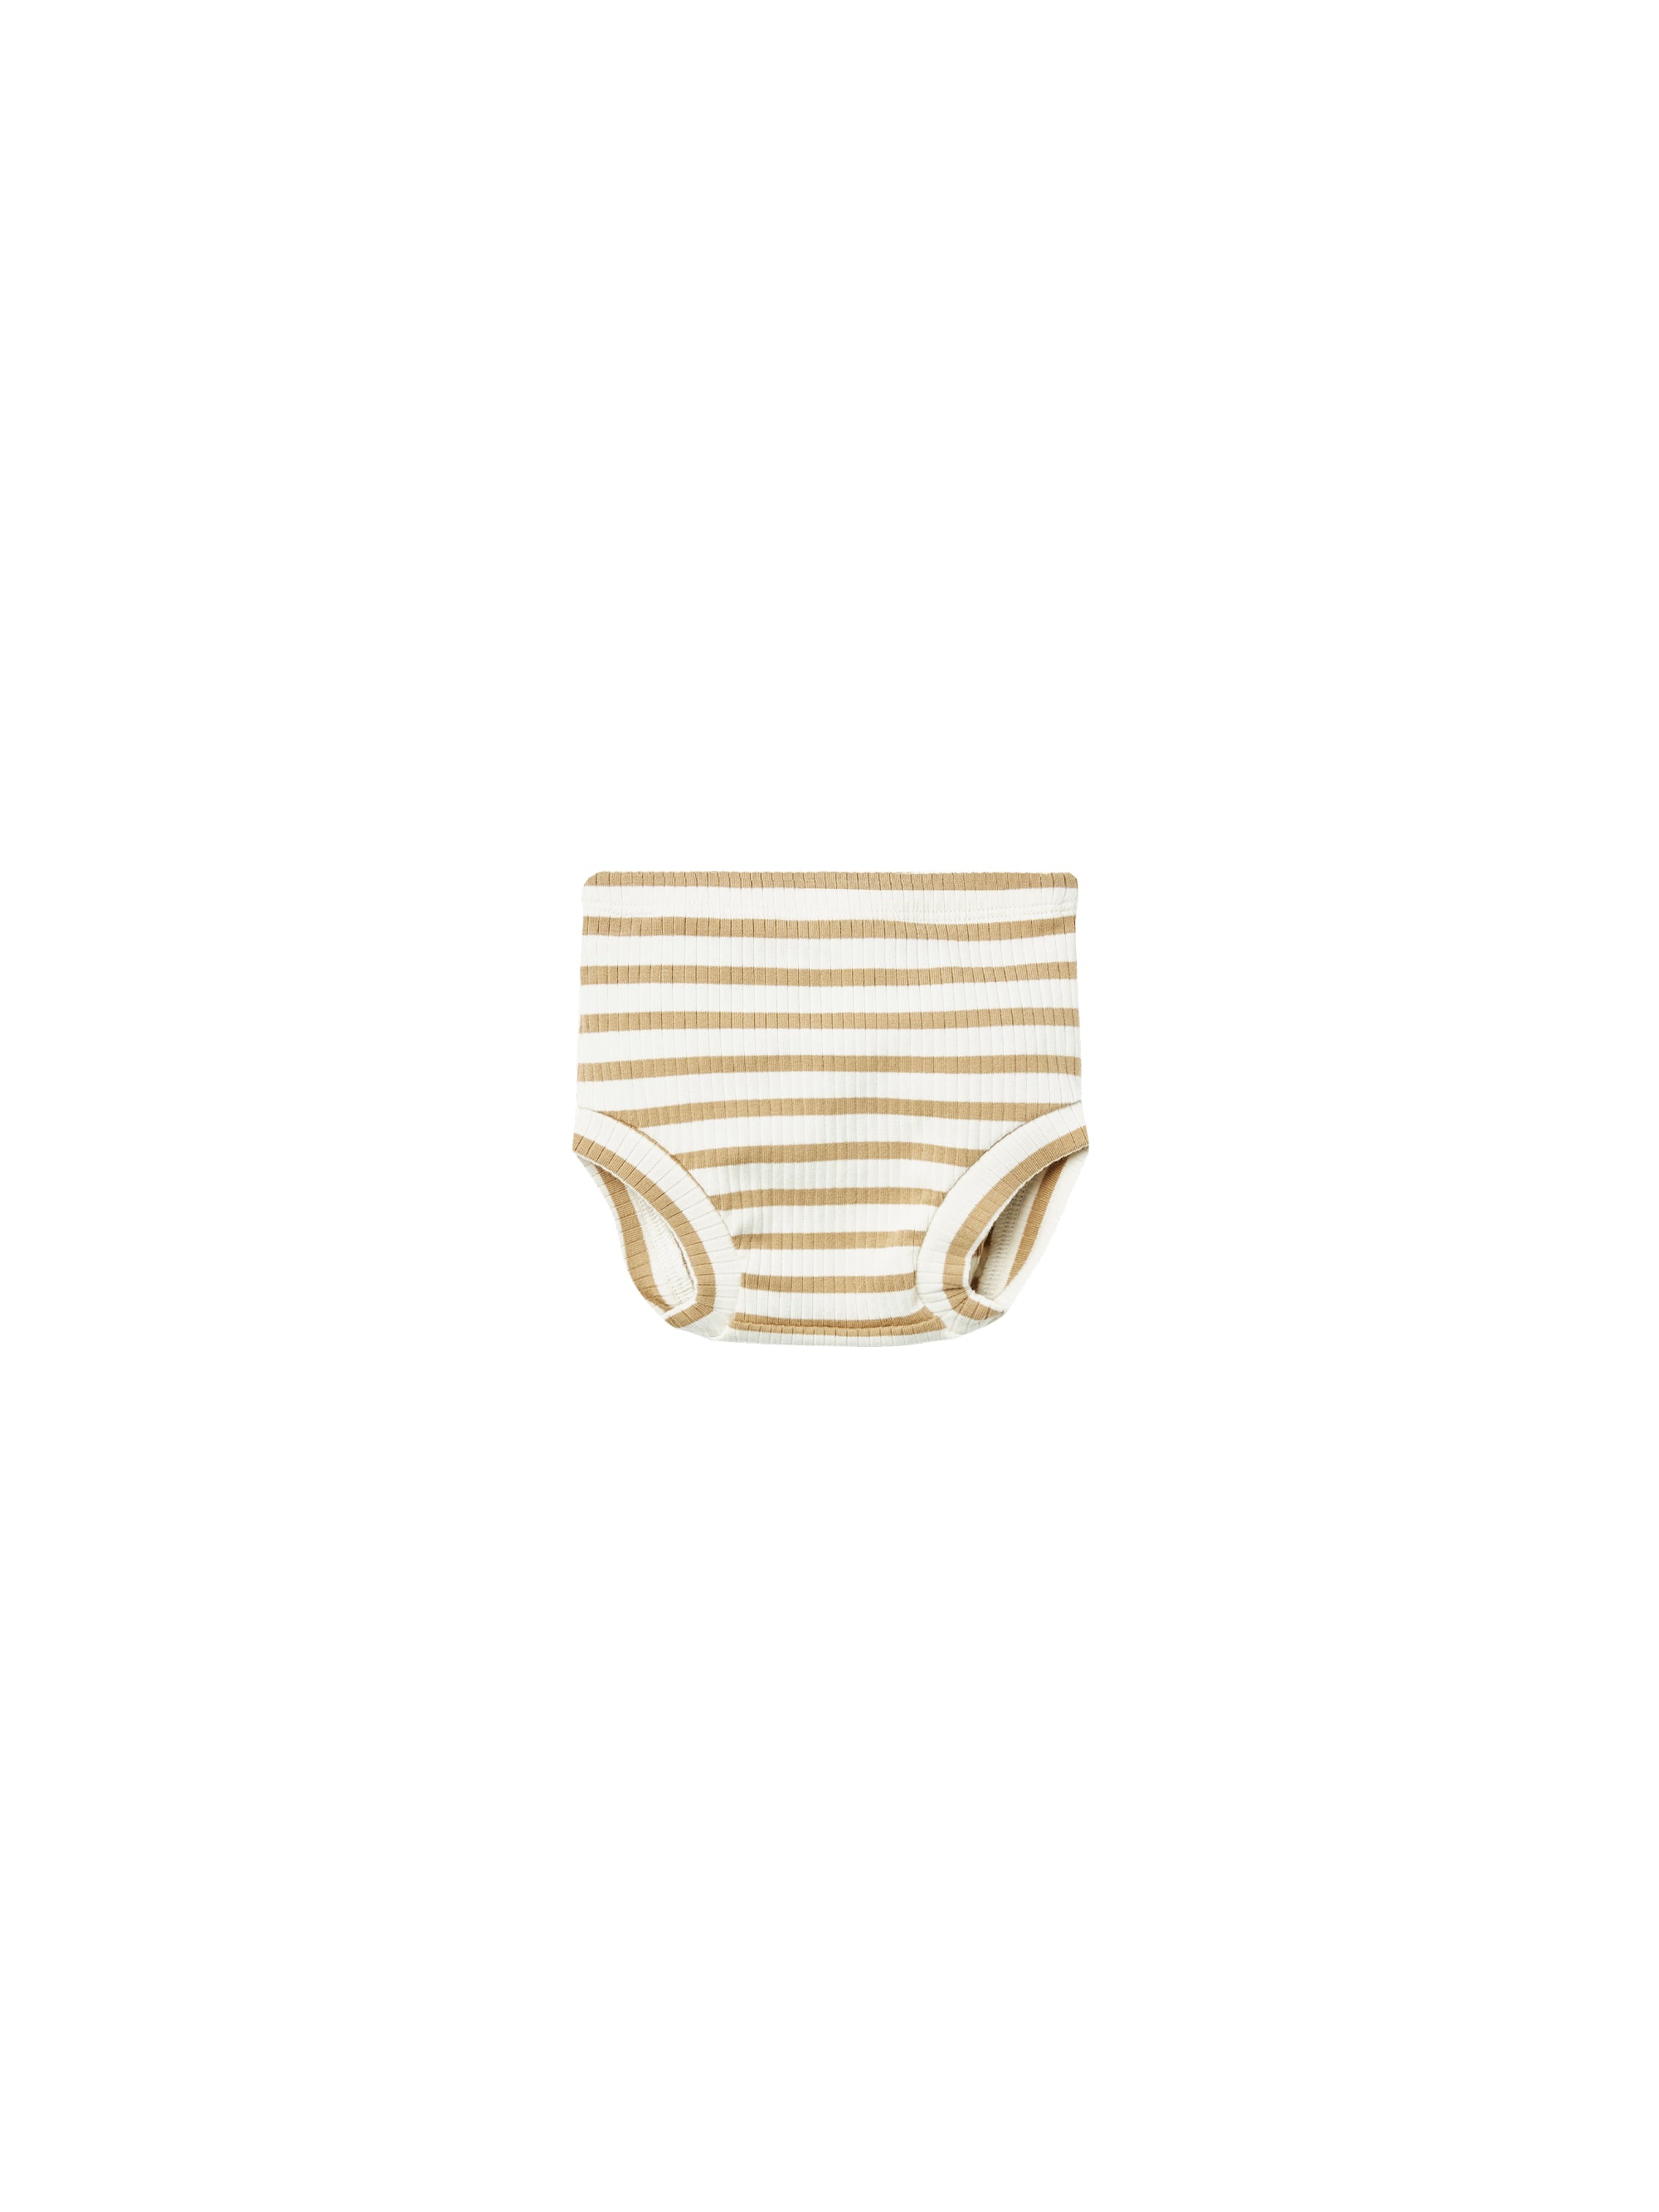 QUINCY MAE RIBBED BLOOMER / HONEY STRIPE